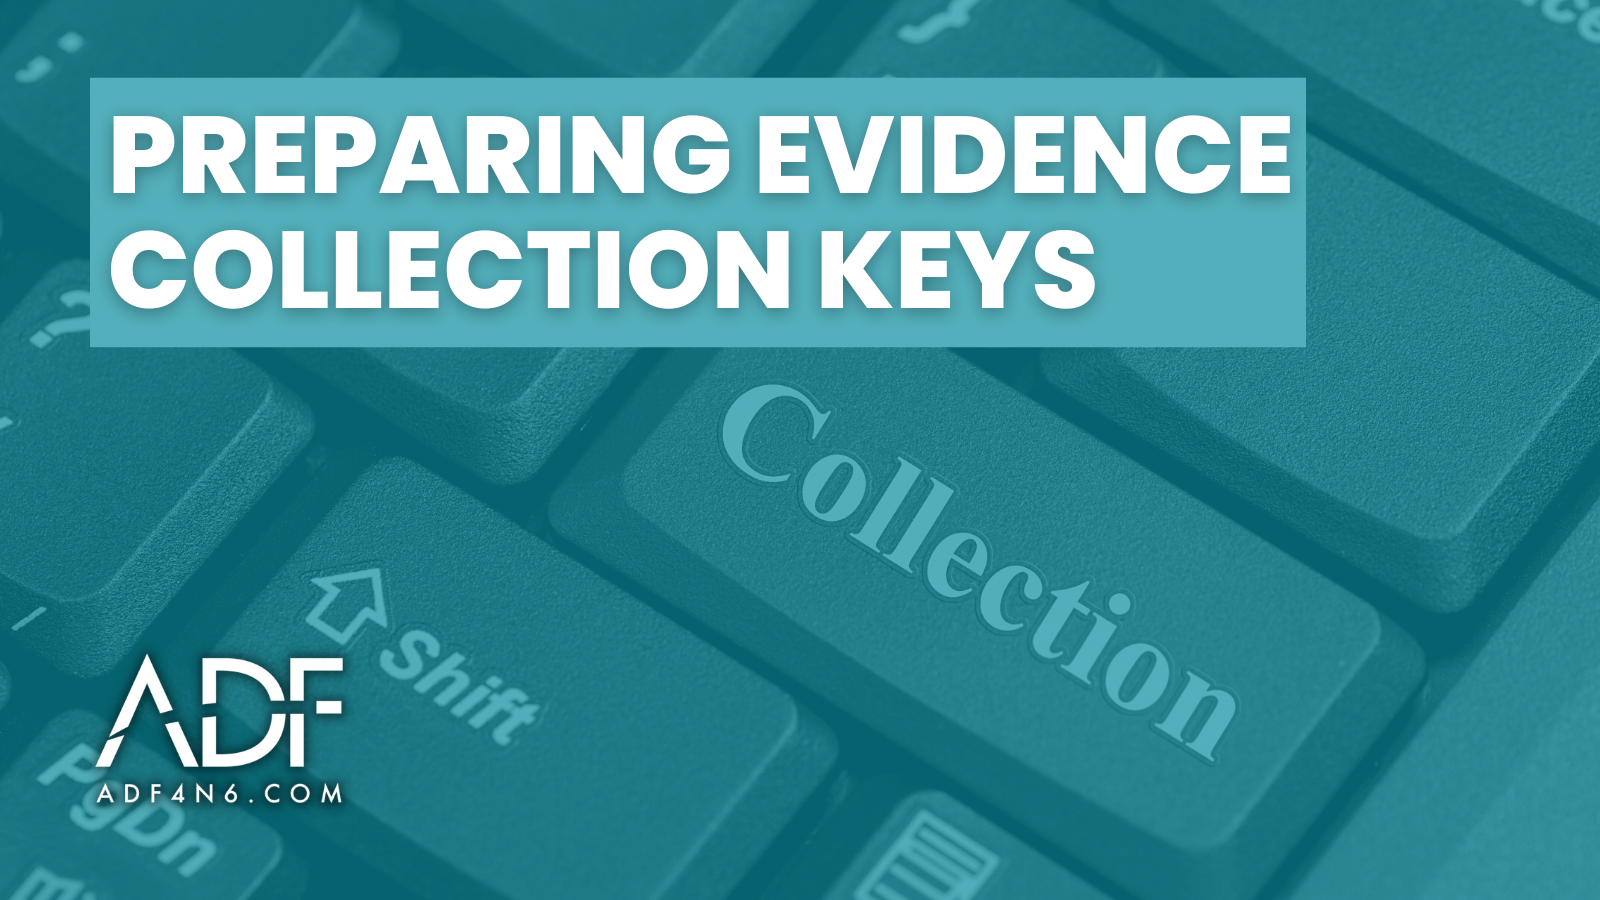 Prepare Evidence Collection Keys for a Digital Forensic Investigation (UPDATED JULY 2022)